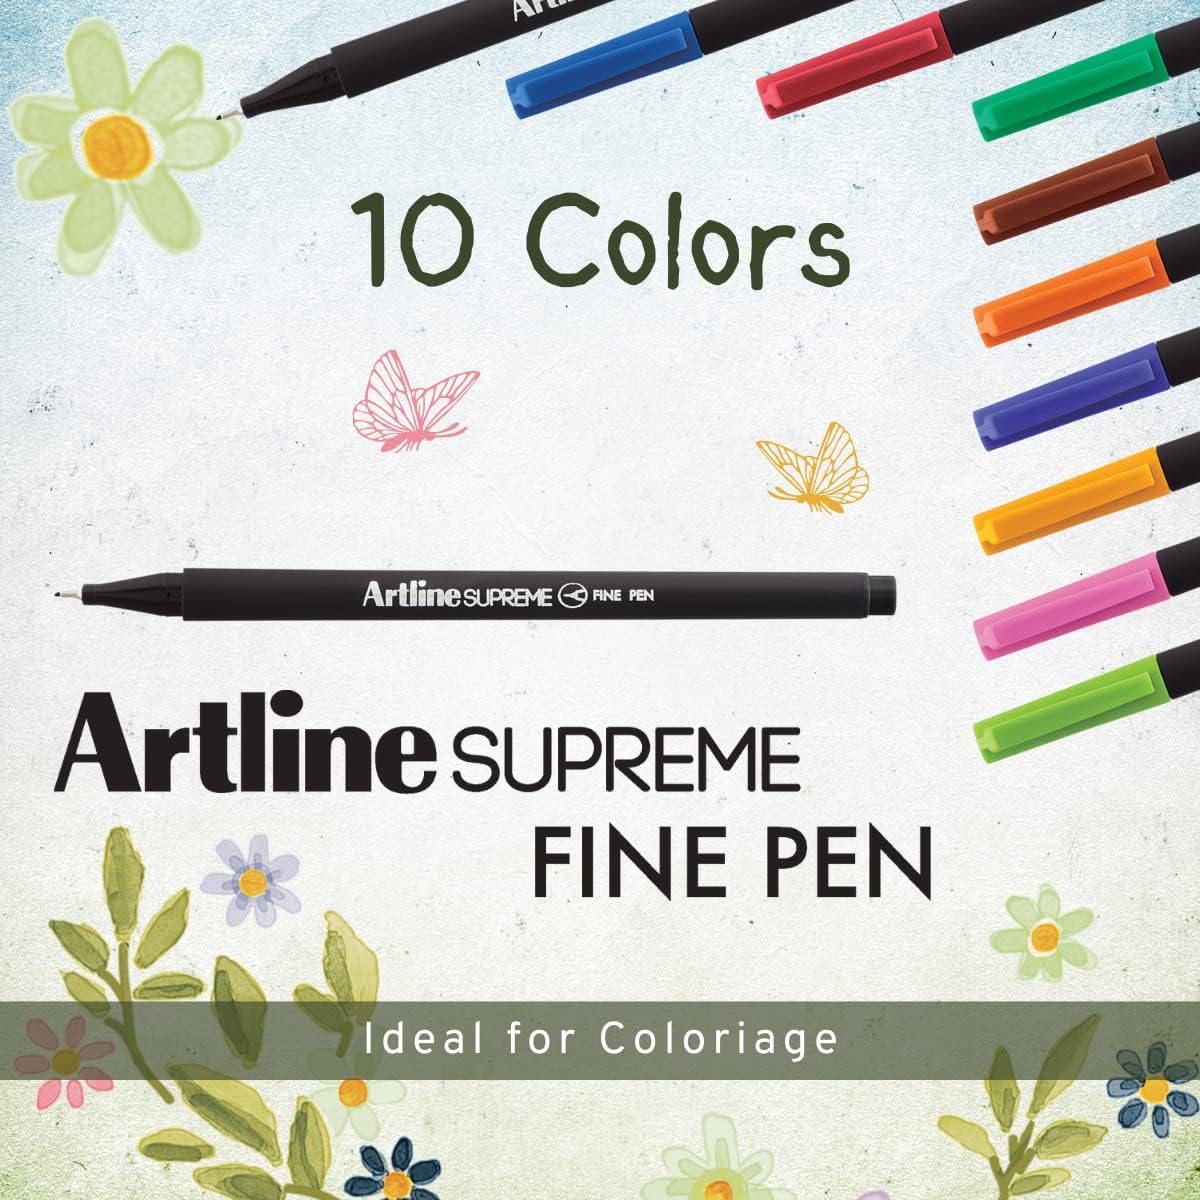 Artline SUPREME Fine Pens for Drawing,Coloring,Writing,0.4mm